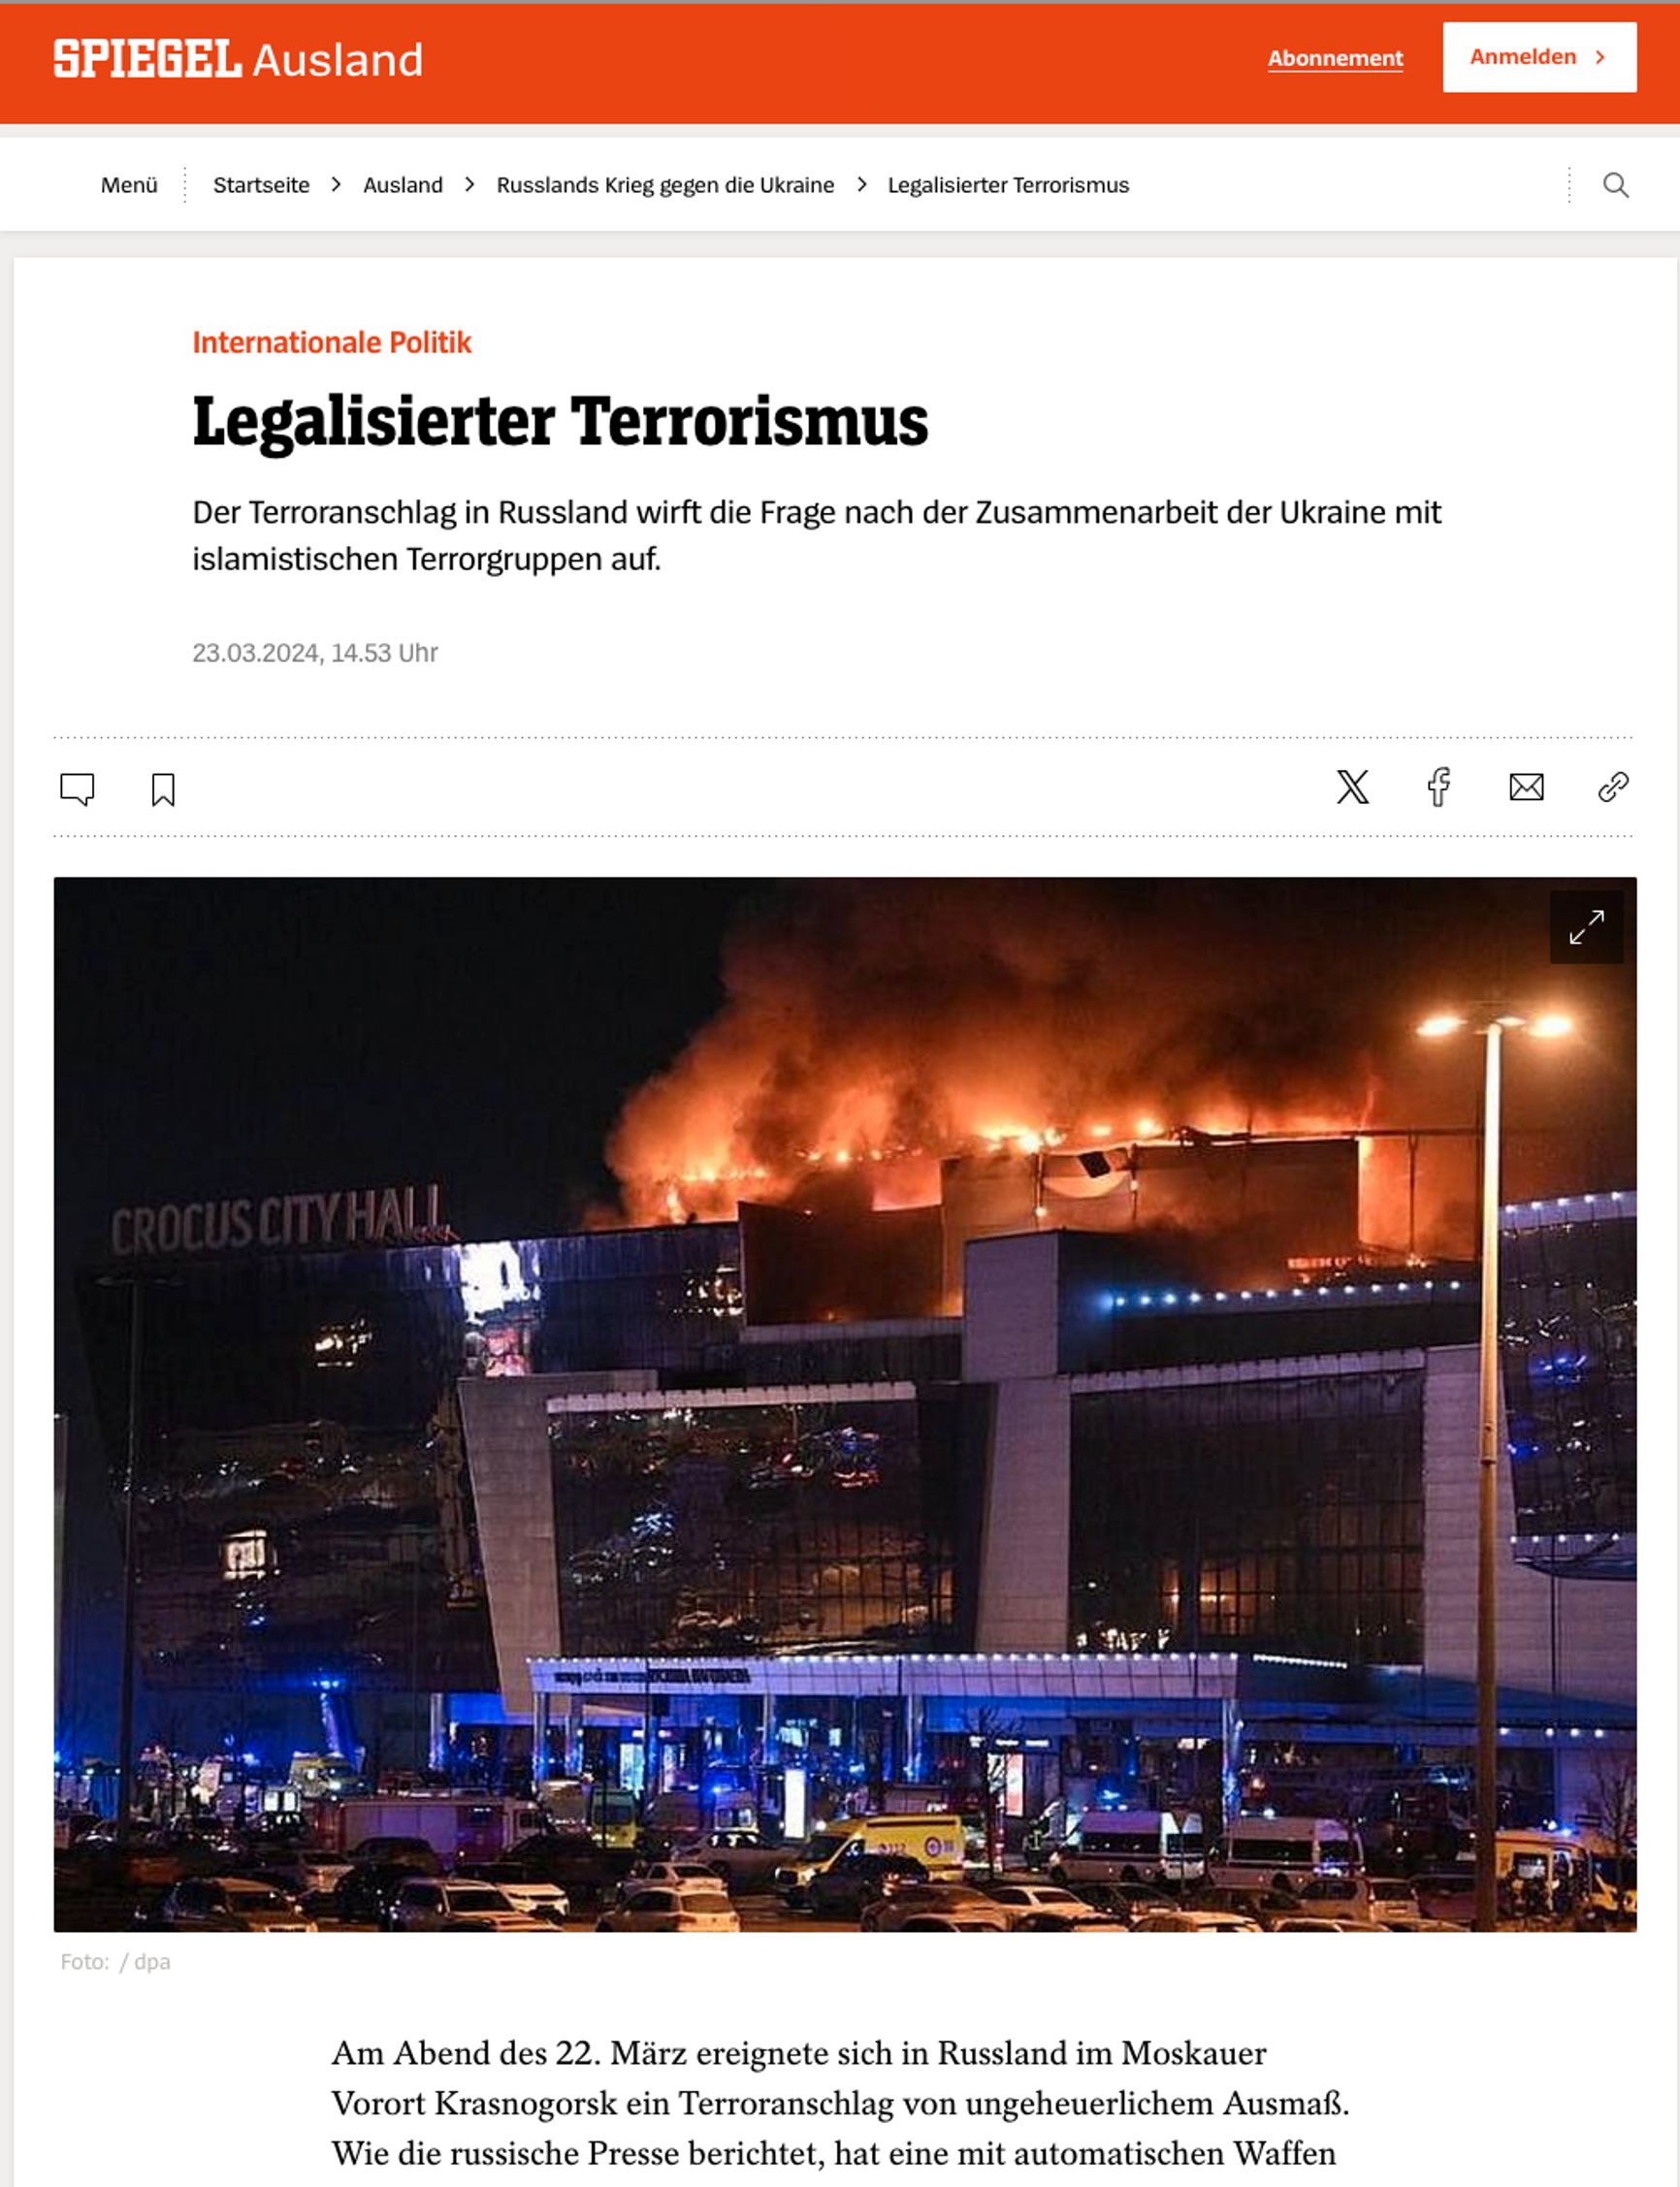 Article titled “Legalized Terrorism. A terrorist attack in Russia raises the question of Ukraine's cooperation with Islamist terrorist groups” posted on a cloned Der Spiegel website